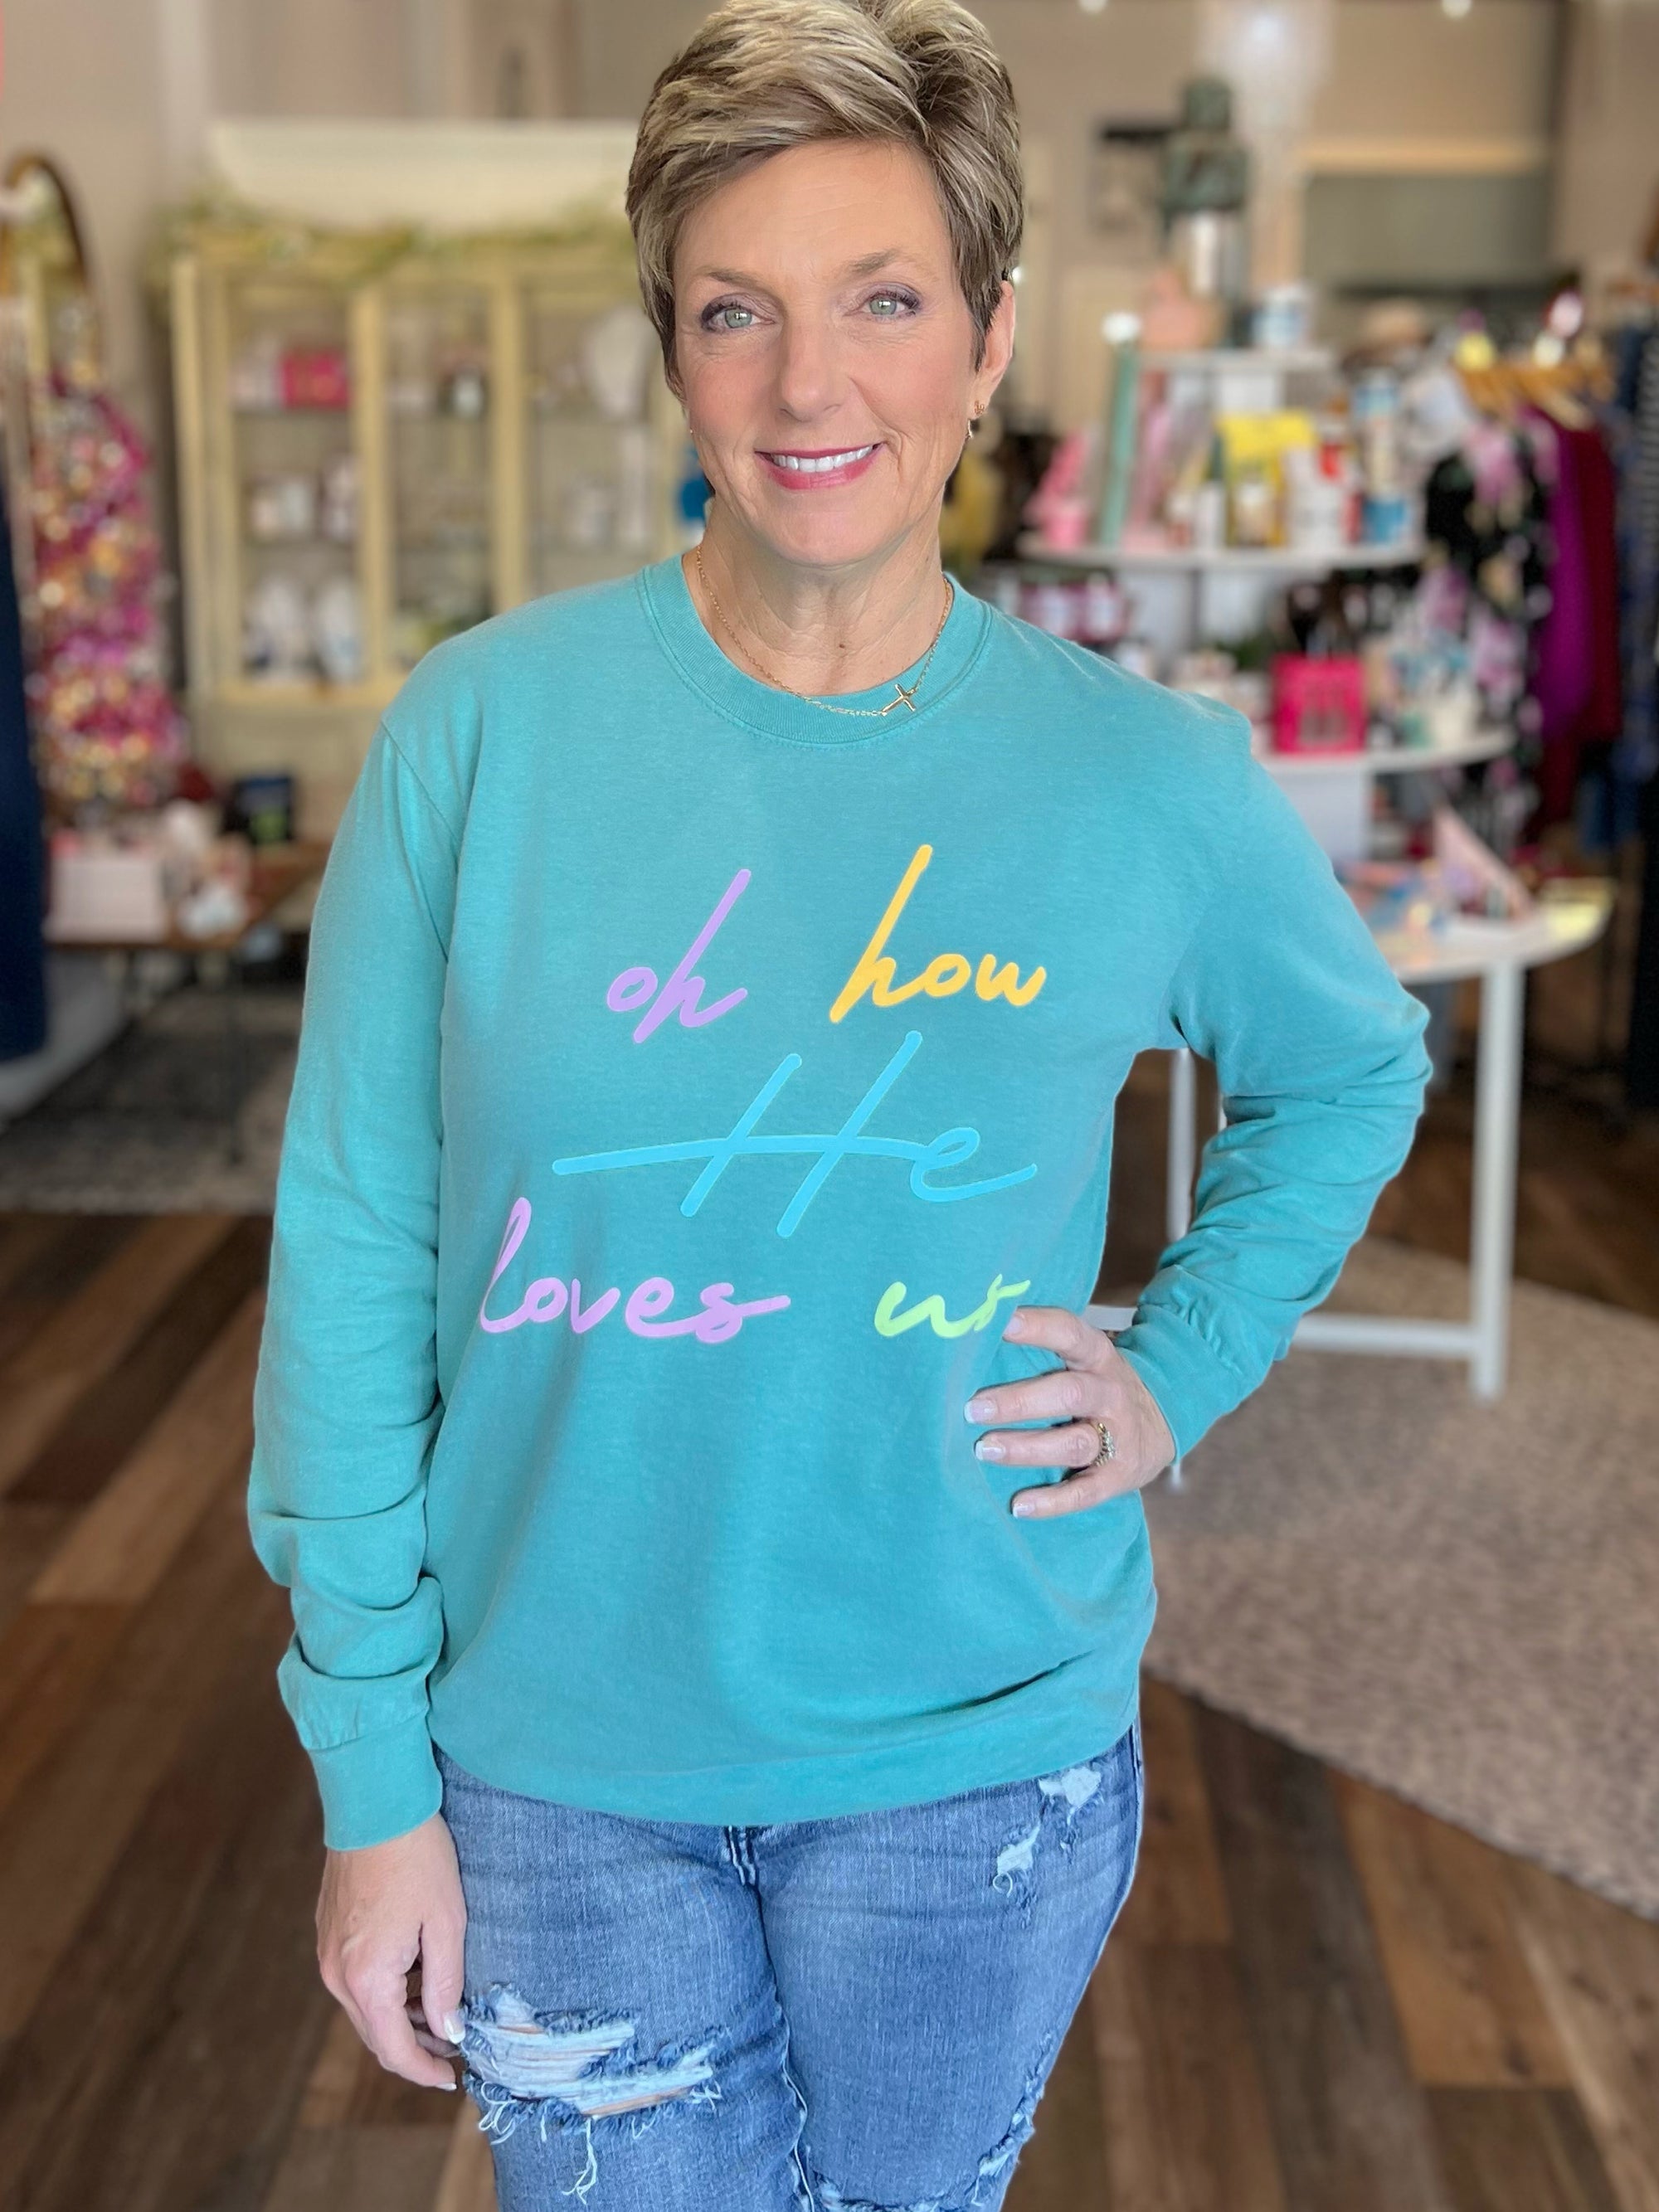 Seafoam "Oh How He Loves Us" Graphic Long Sleeve